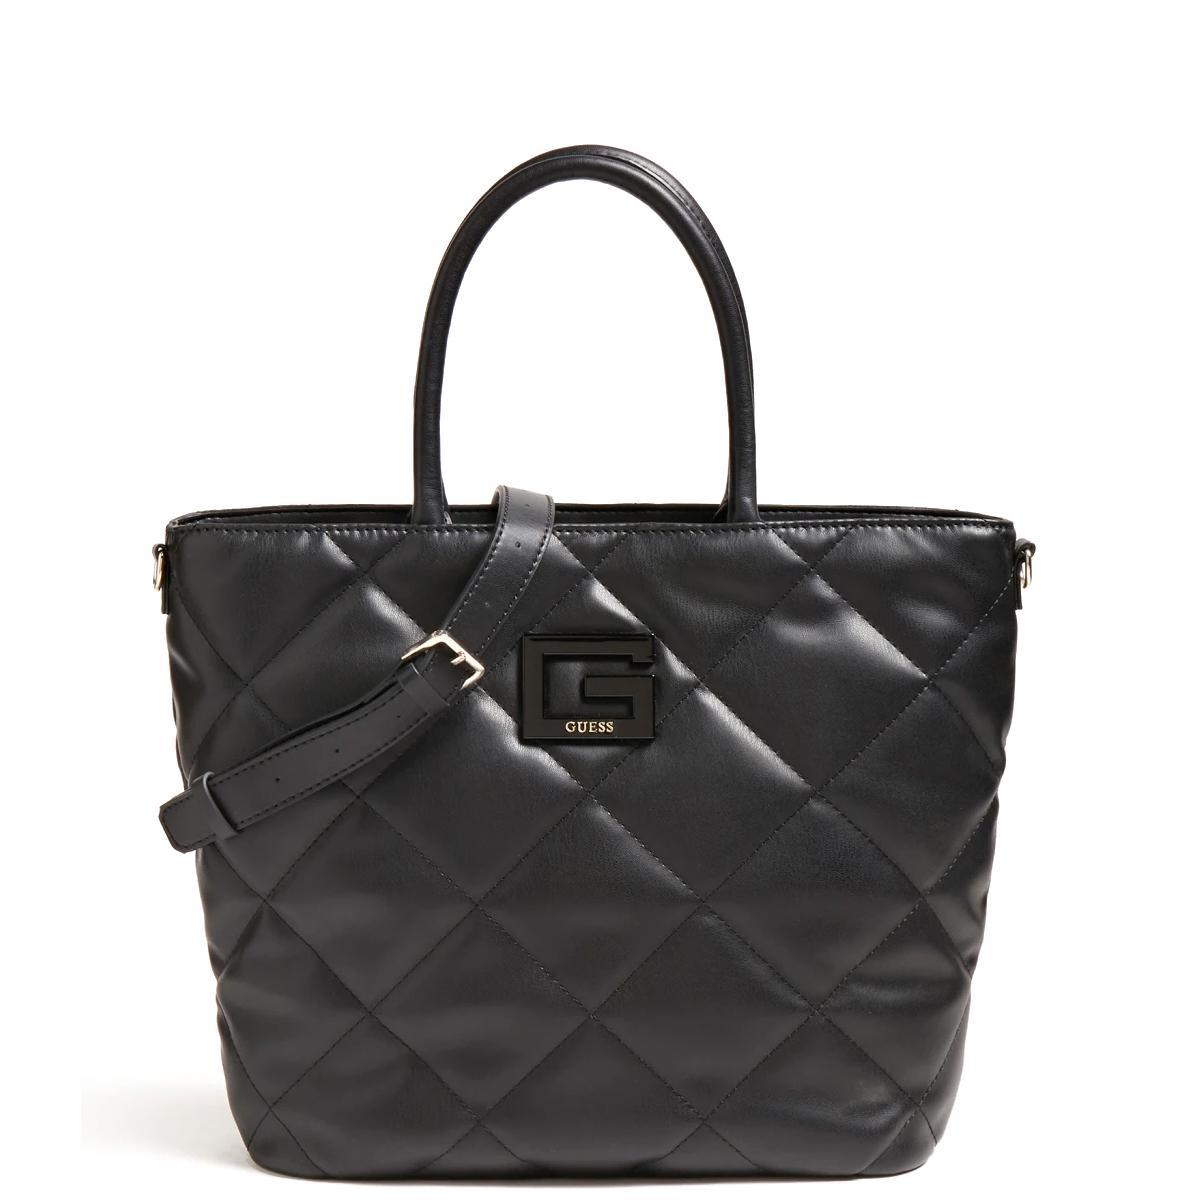 Guess Black Brightside Quilted Tote Bag